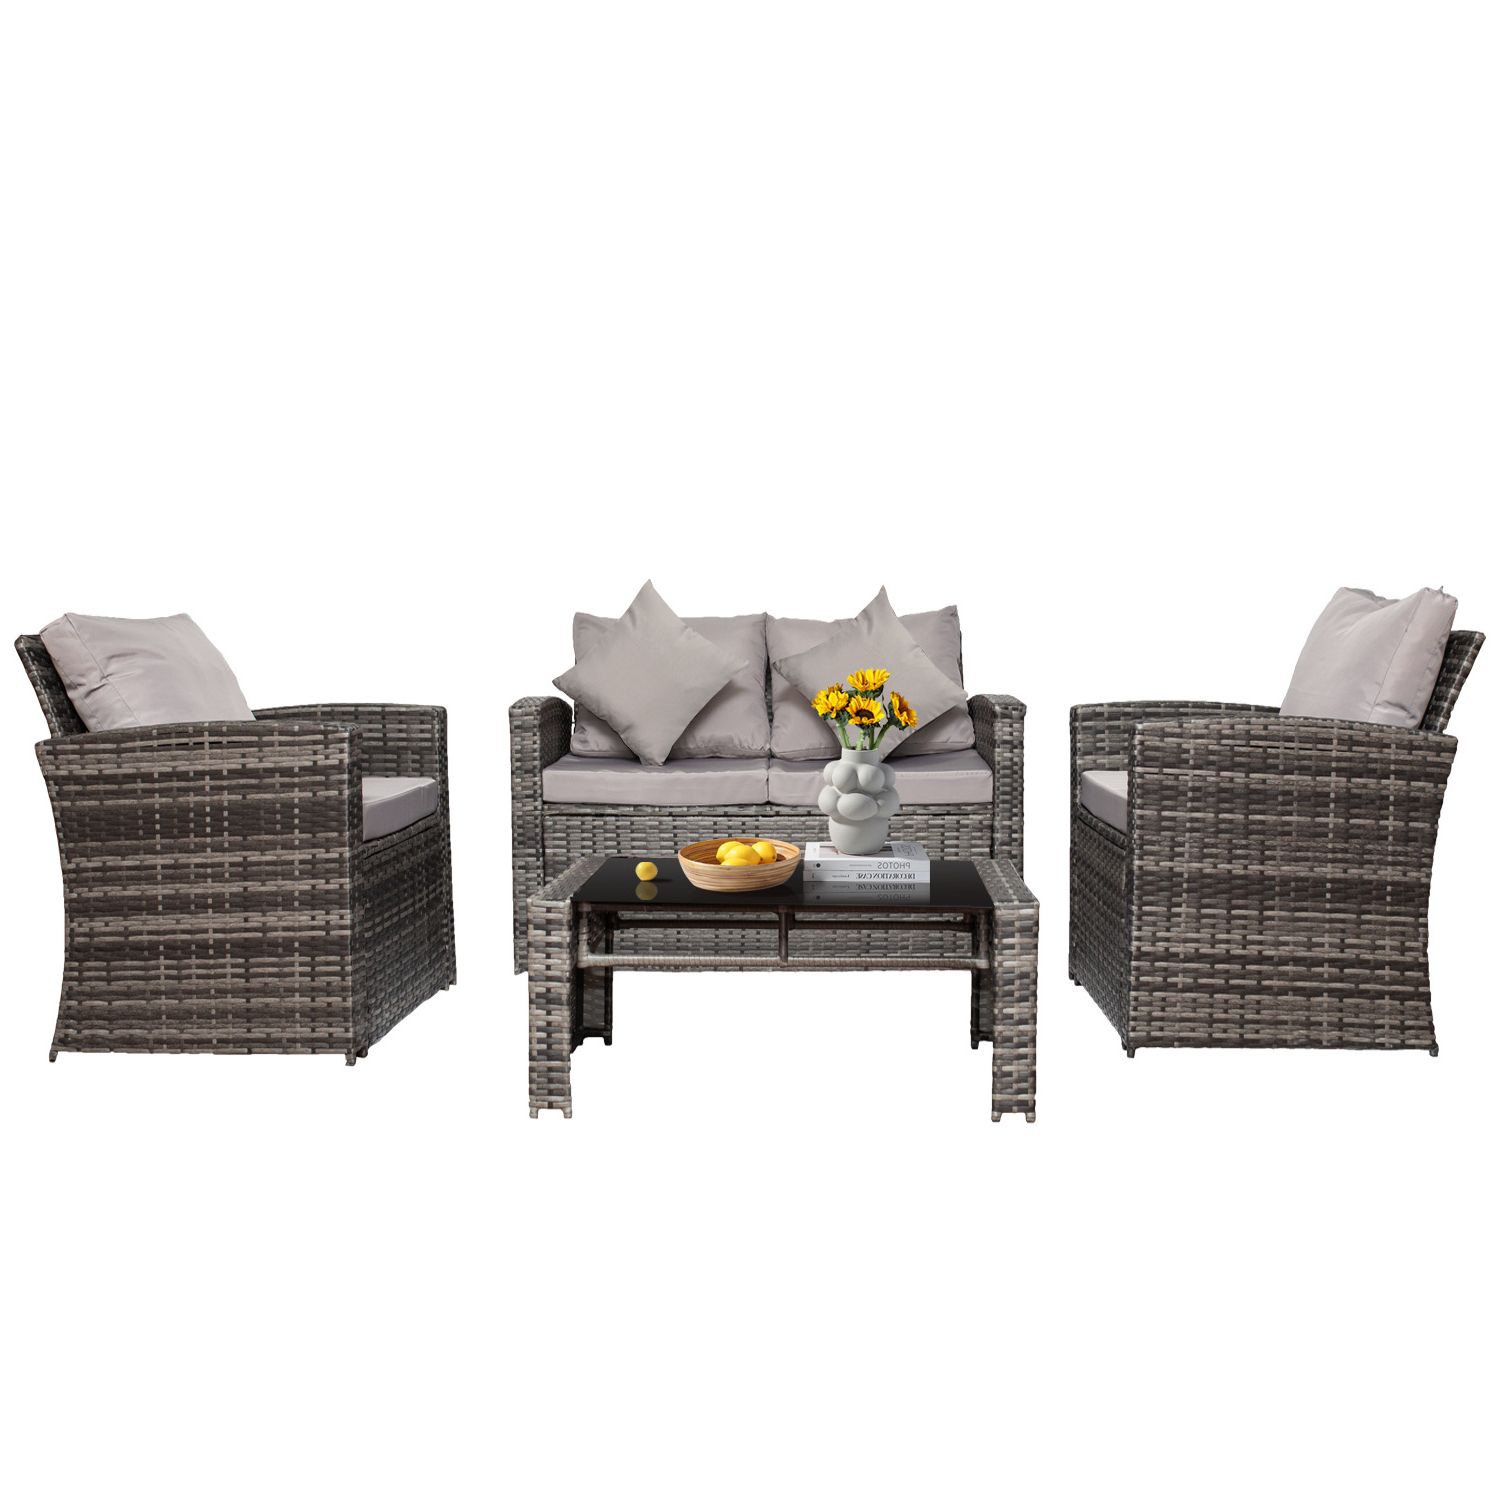 4 Piece Wicker Outdoor Seating Sets With 2020 4 Piece Rattan Wicker Patio Conversation Sets Deep Seating Cushioned (View 10 of 15)